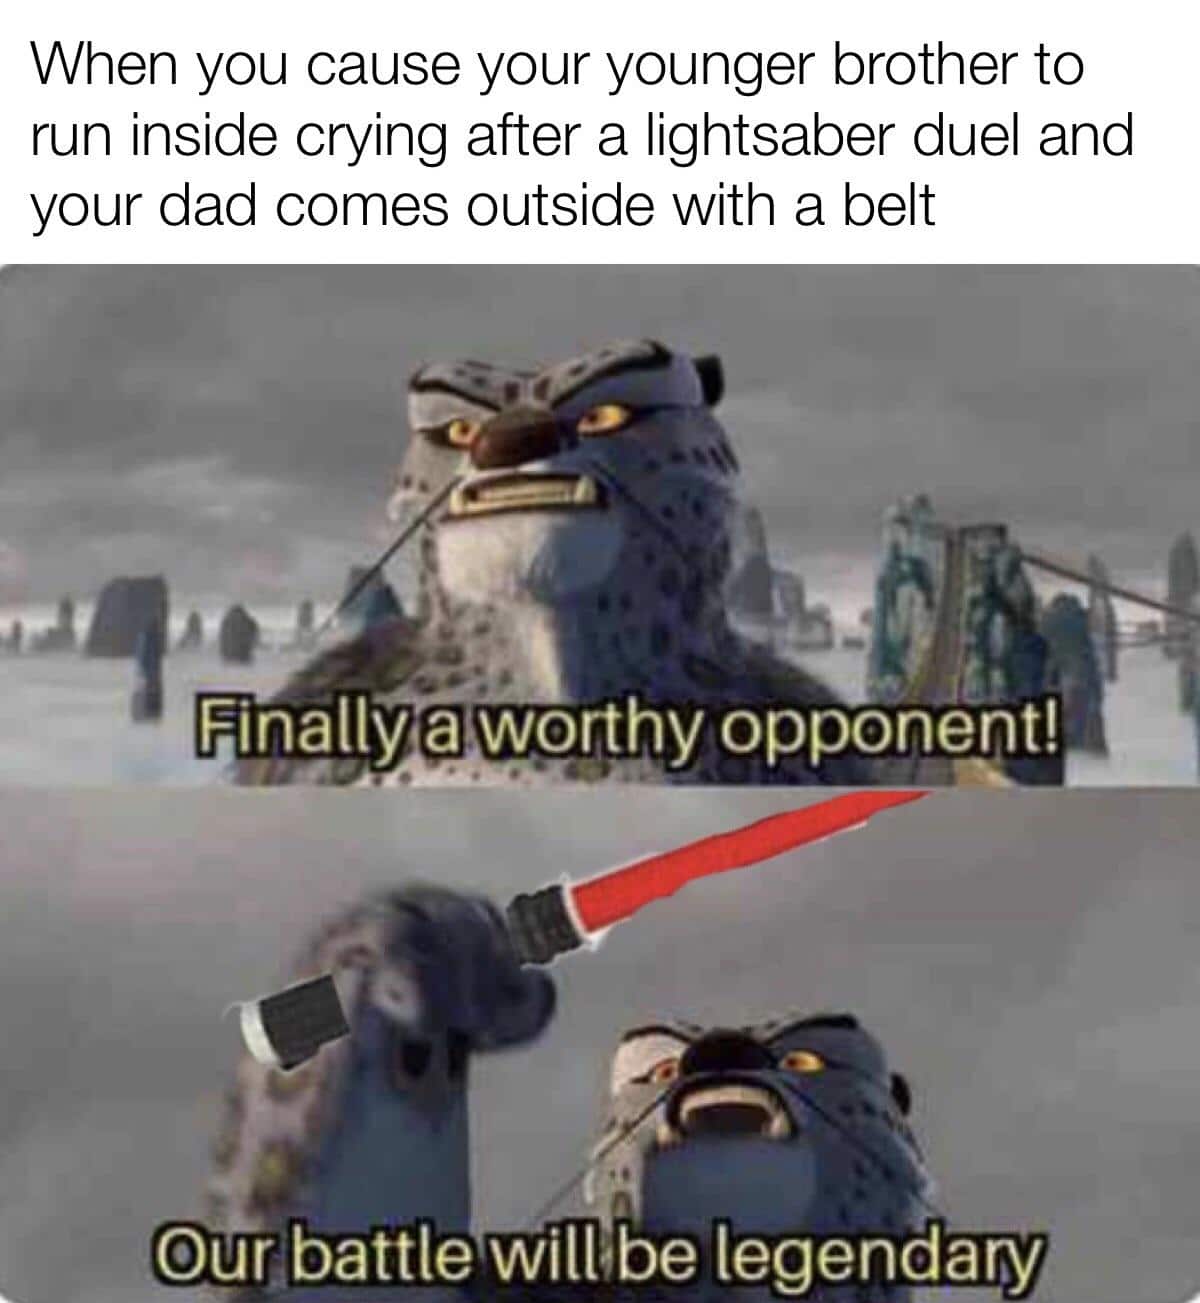 prequel-memes star-wars-memes prequel-memes text: When you cause your younger brother to run inside crying after a lightsaber duel and your dad comes outside with a belt opponent! gunbattle willibe legendary) 